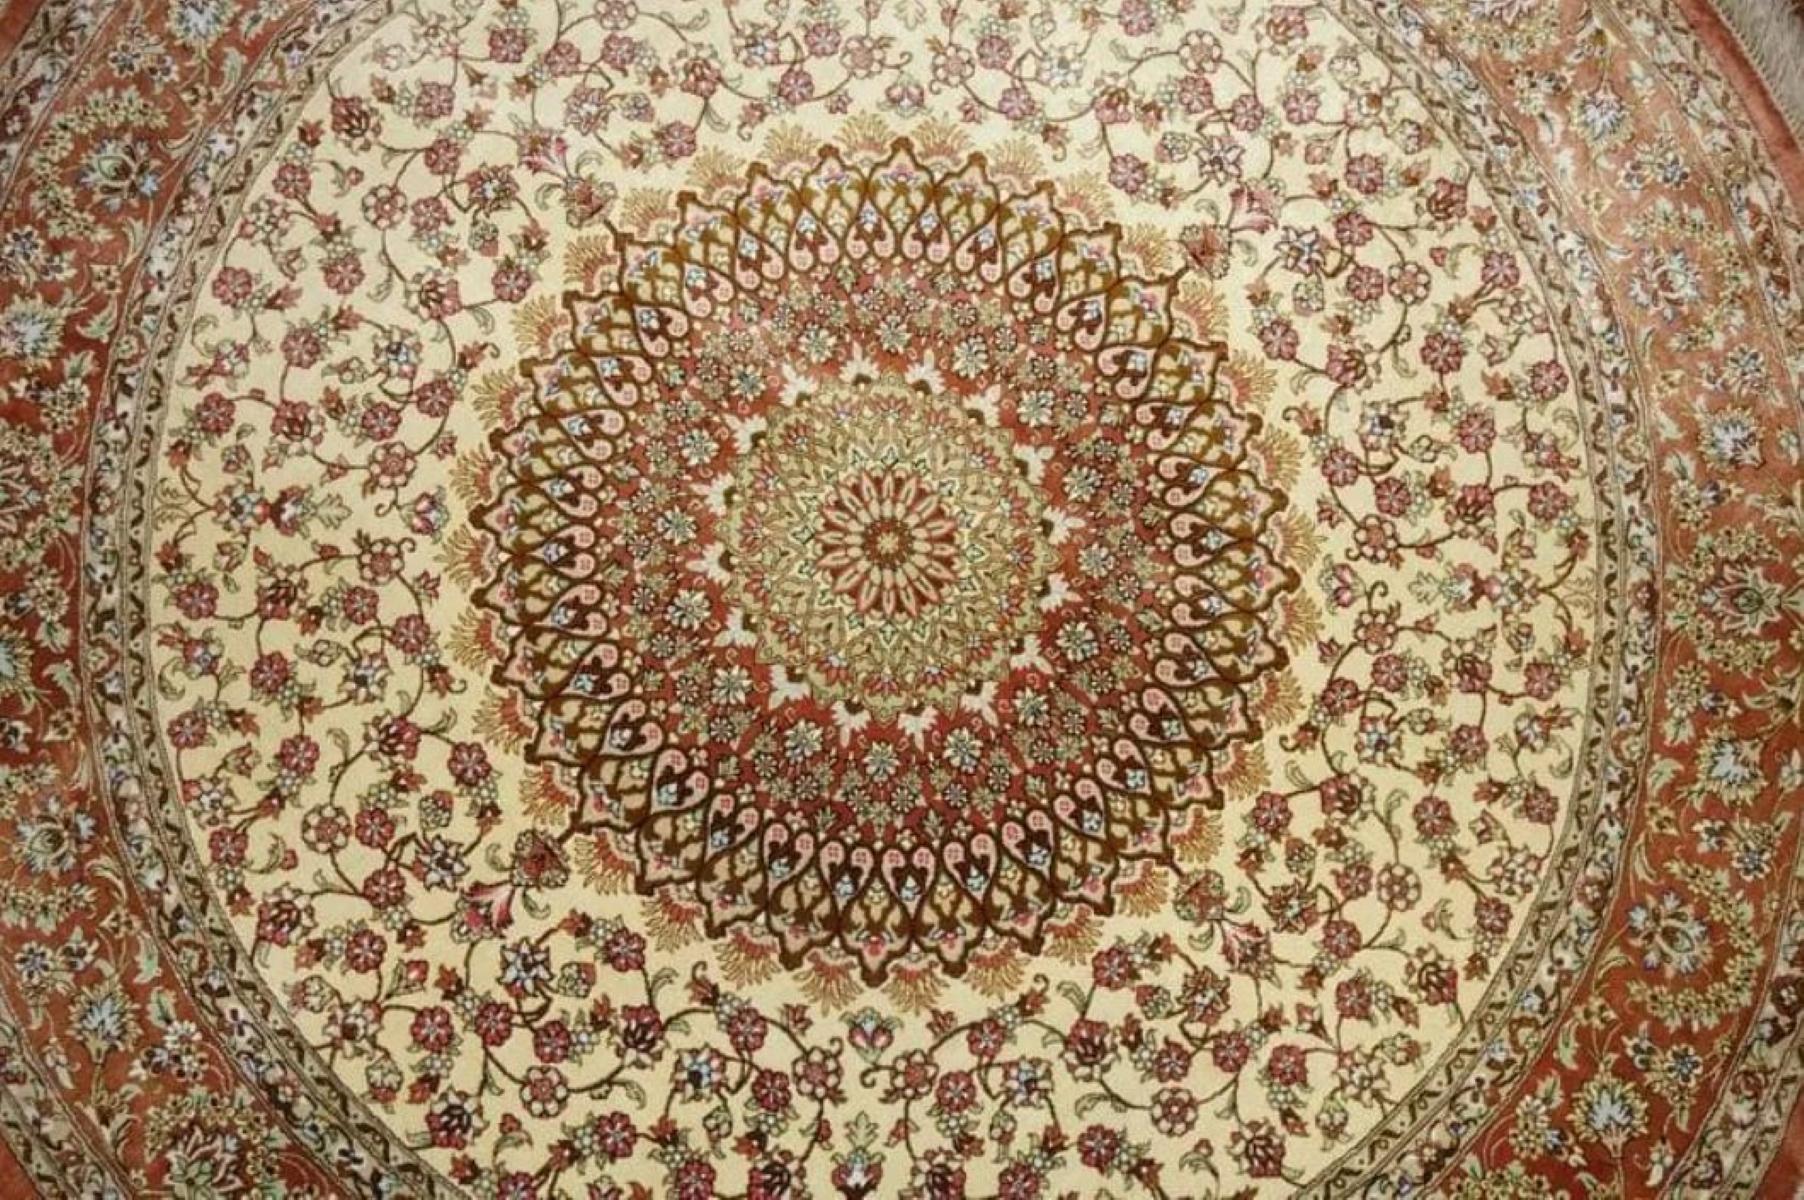 Hand-Woven Very fine Persian Silk Qum Rug - 5' x 5' For Sale